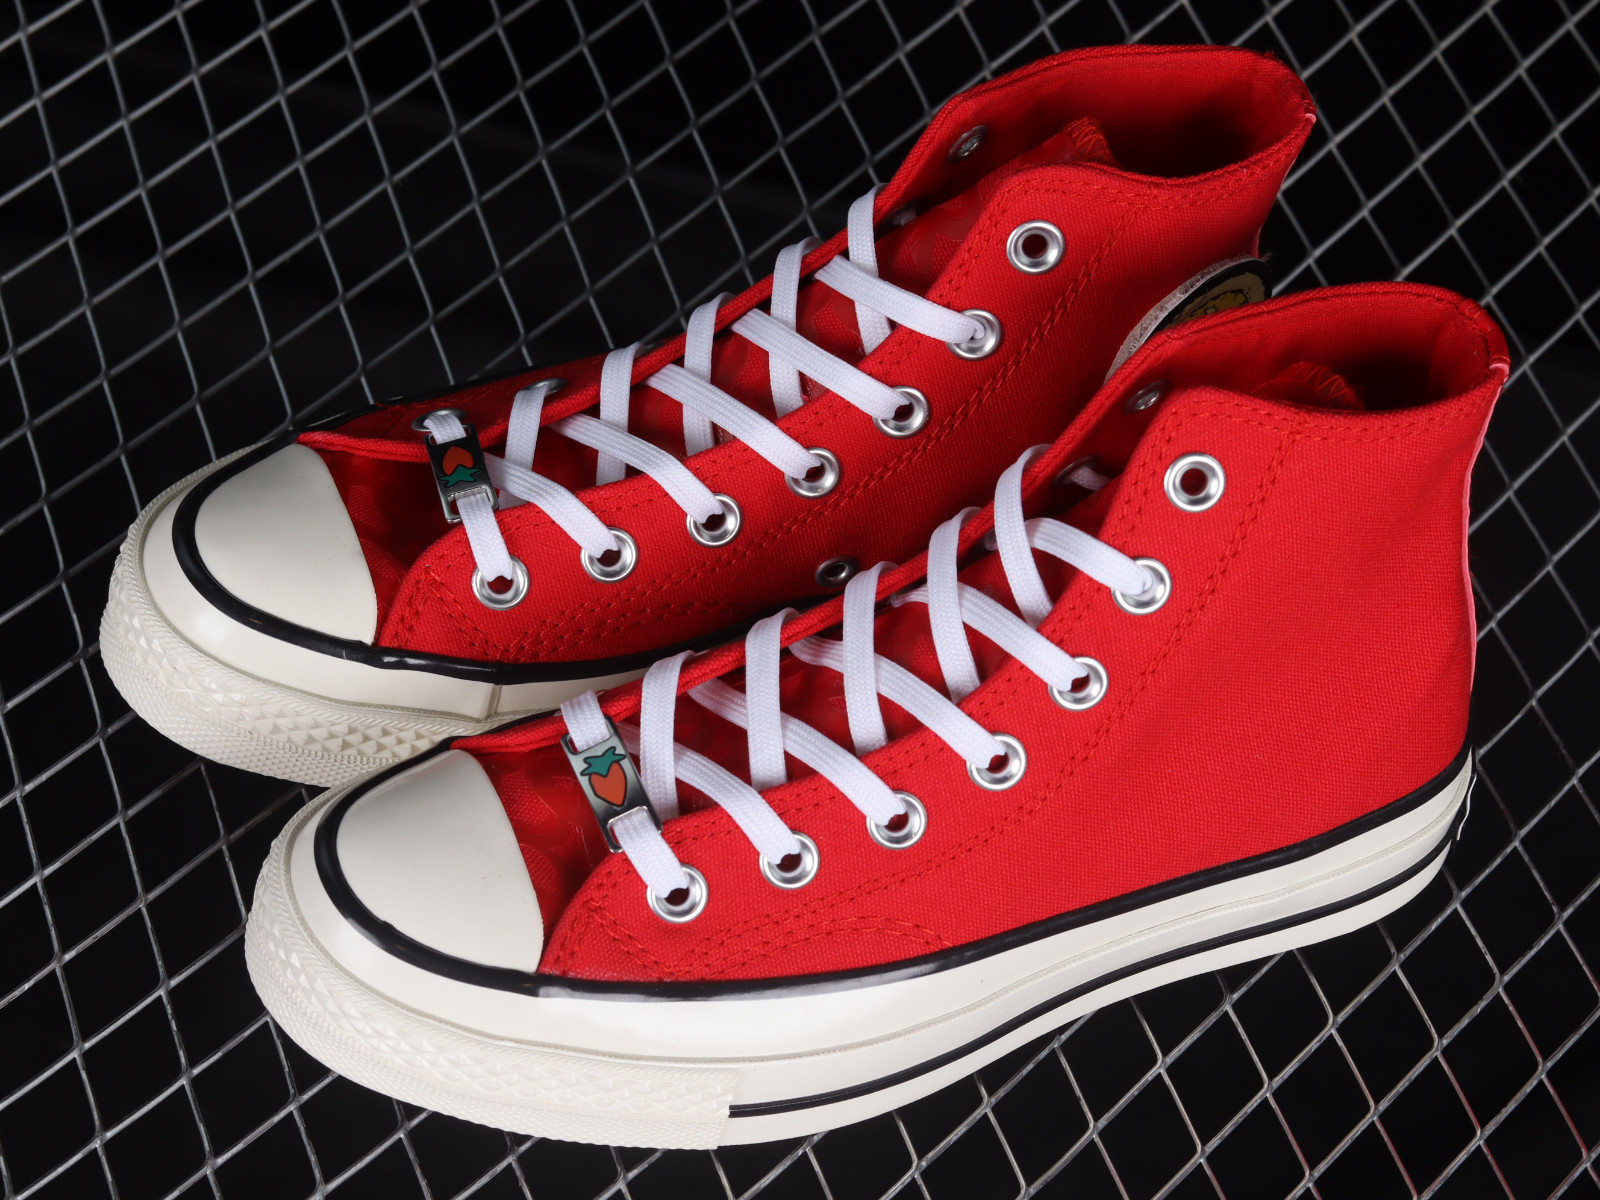 employment fairy Excrement Converse Chuck Taylor All Star 1970s High China New Year Red Black A05266C  - StclaircomoShops